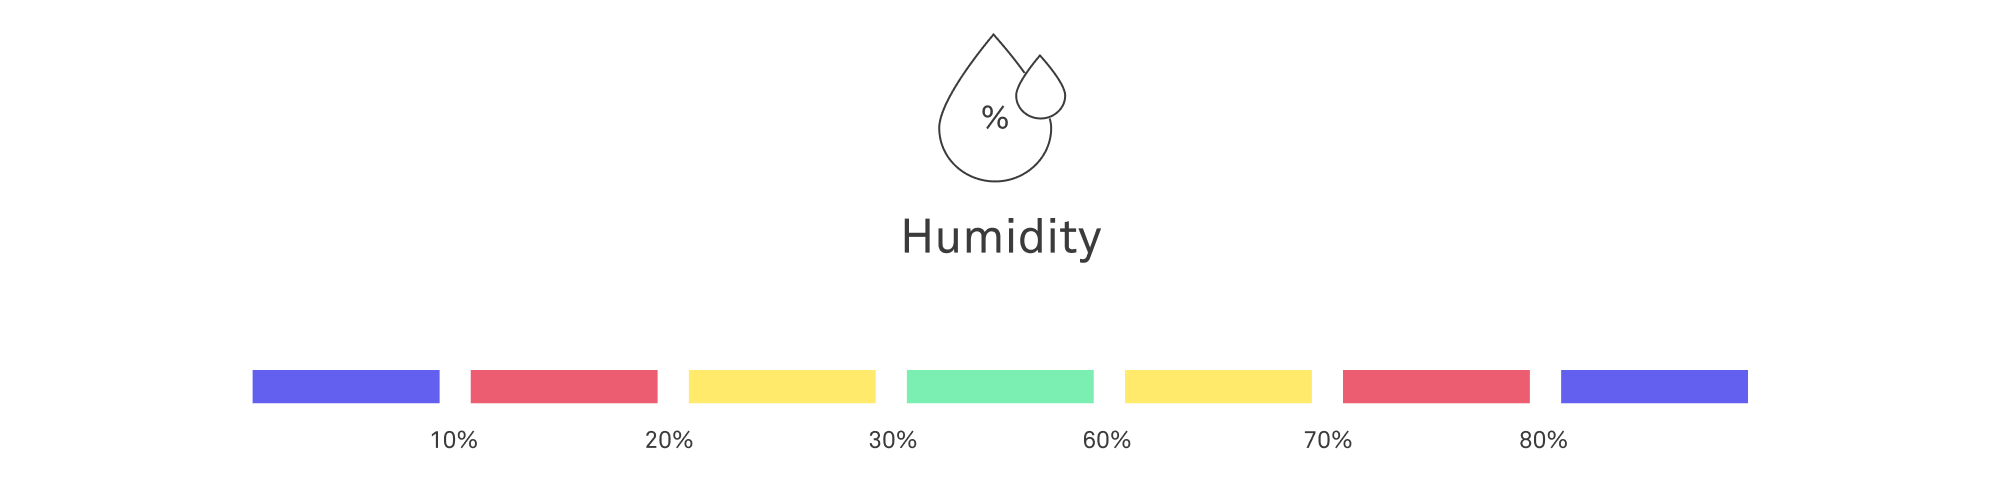 Scale showing varying levels of humidity